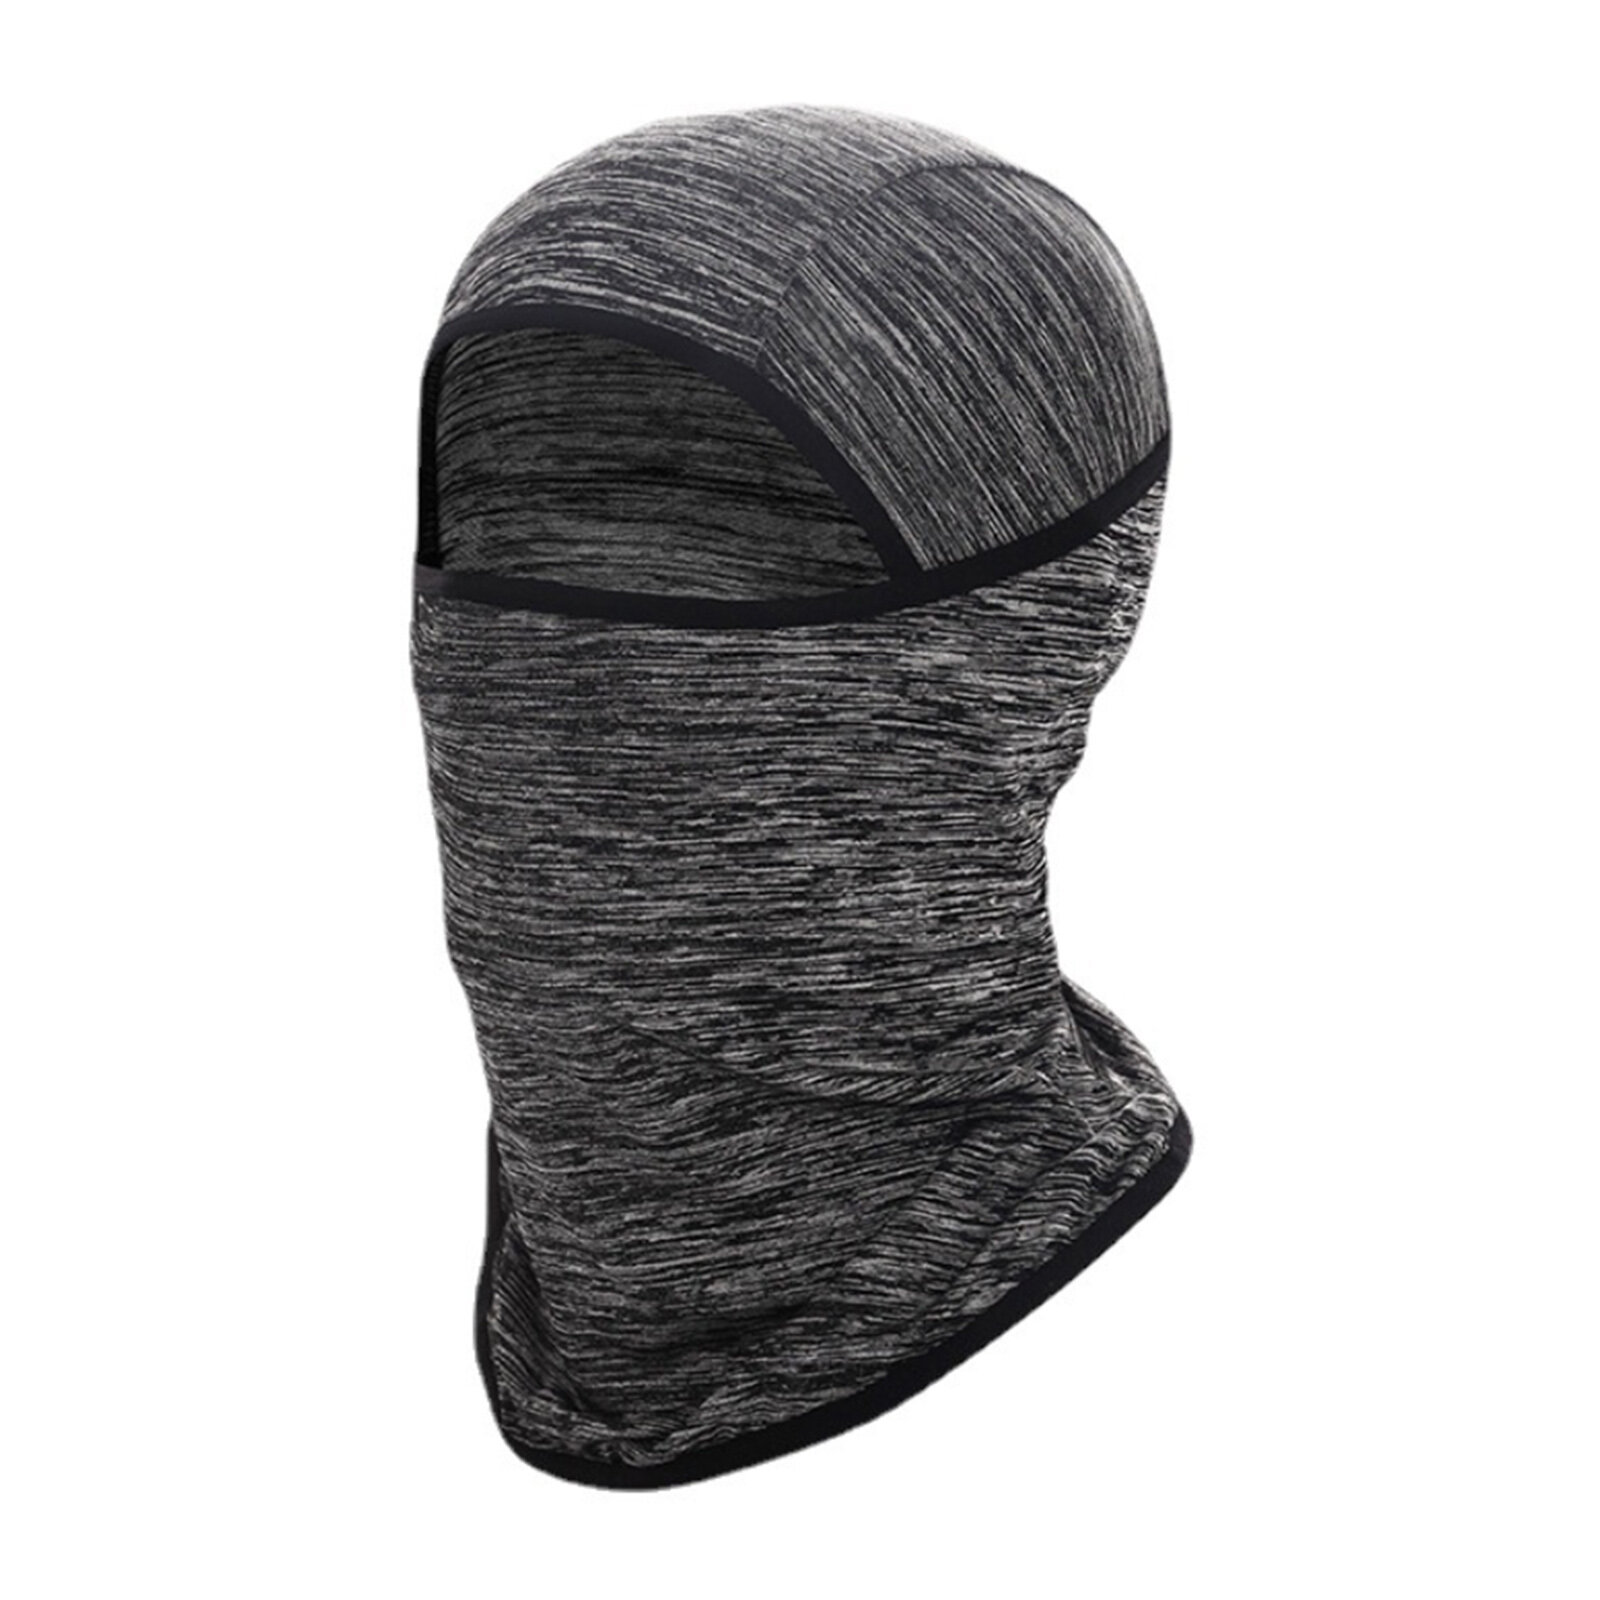 Unisex Polyester Nylon Casual Outdoor Riding Breathable Windproof Sunshade Neck Shield Face Mask Bea